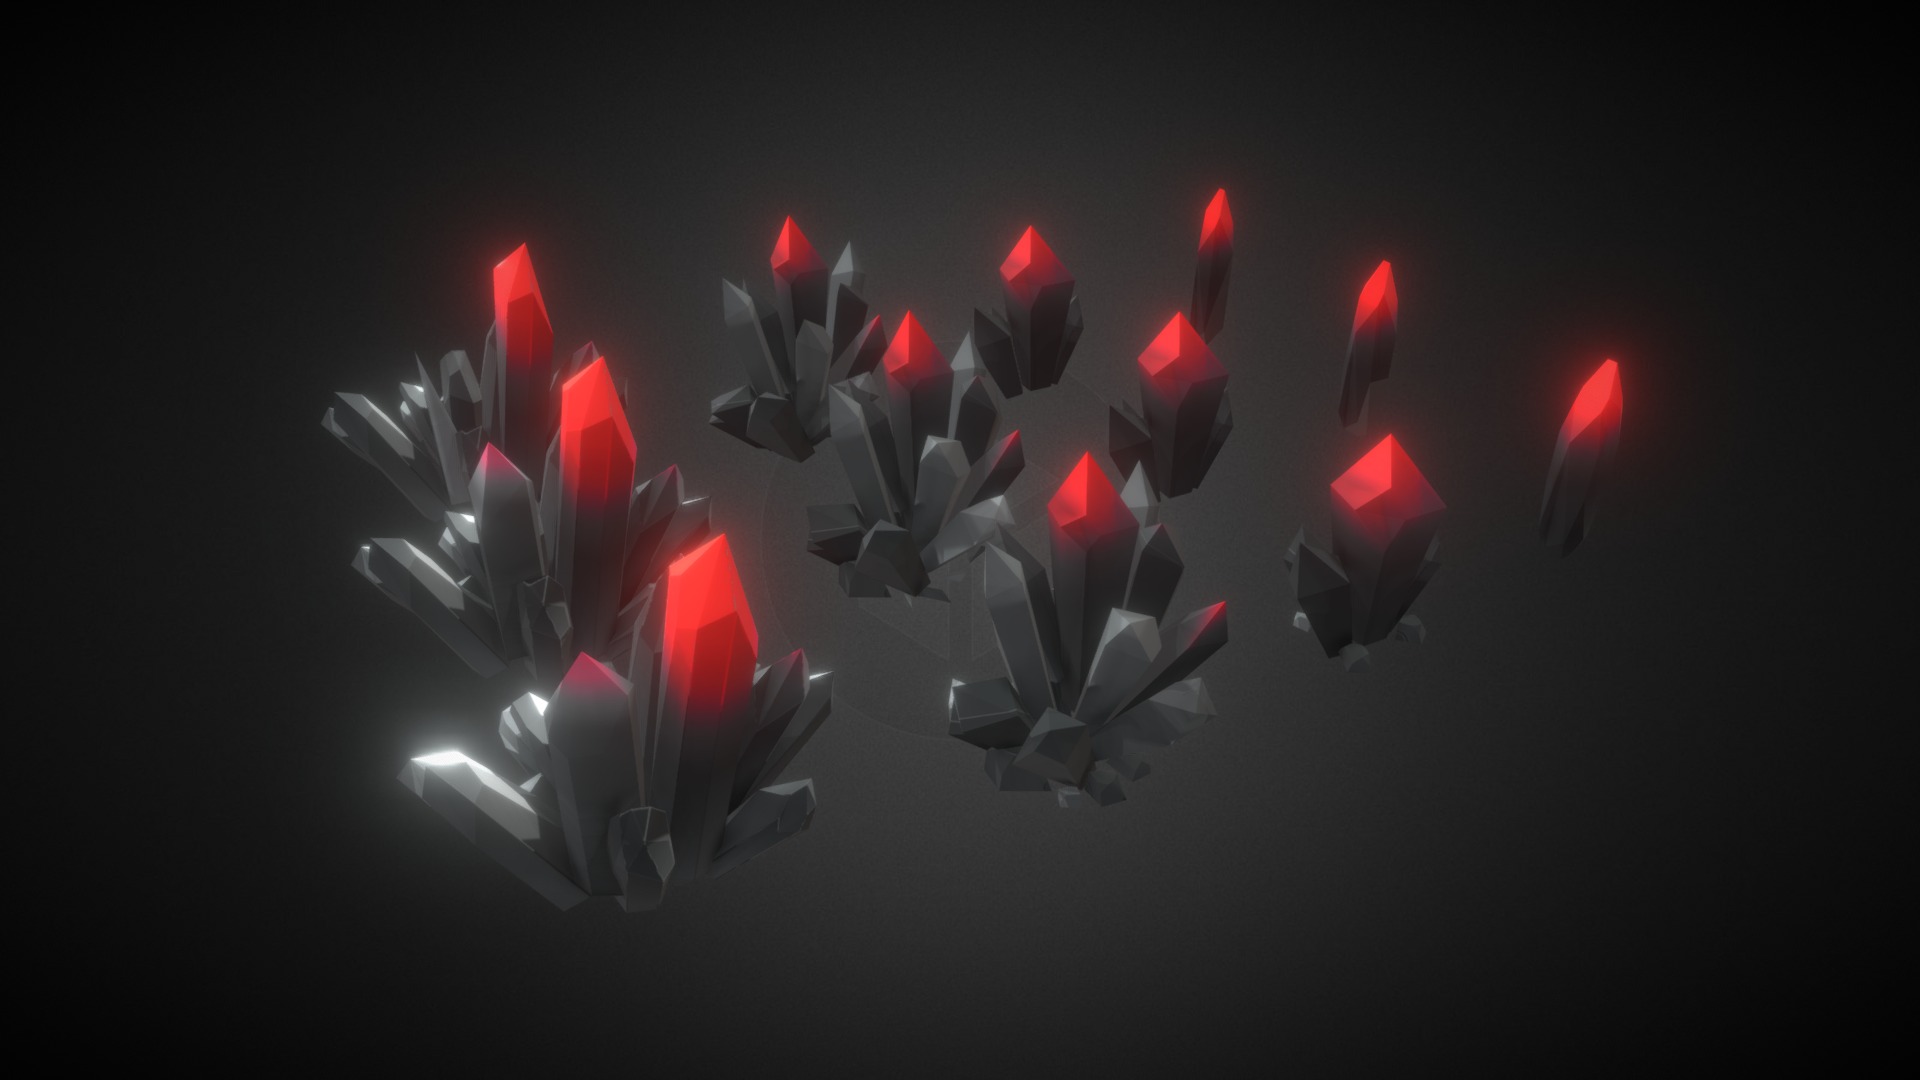 3D model Cristales - This is a 3D model of the Cristales. The 3D model is about a group of lit candles.